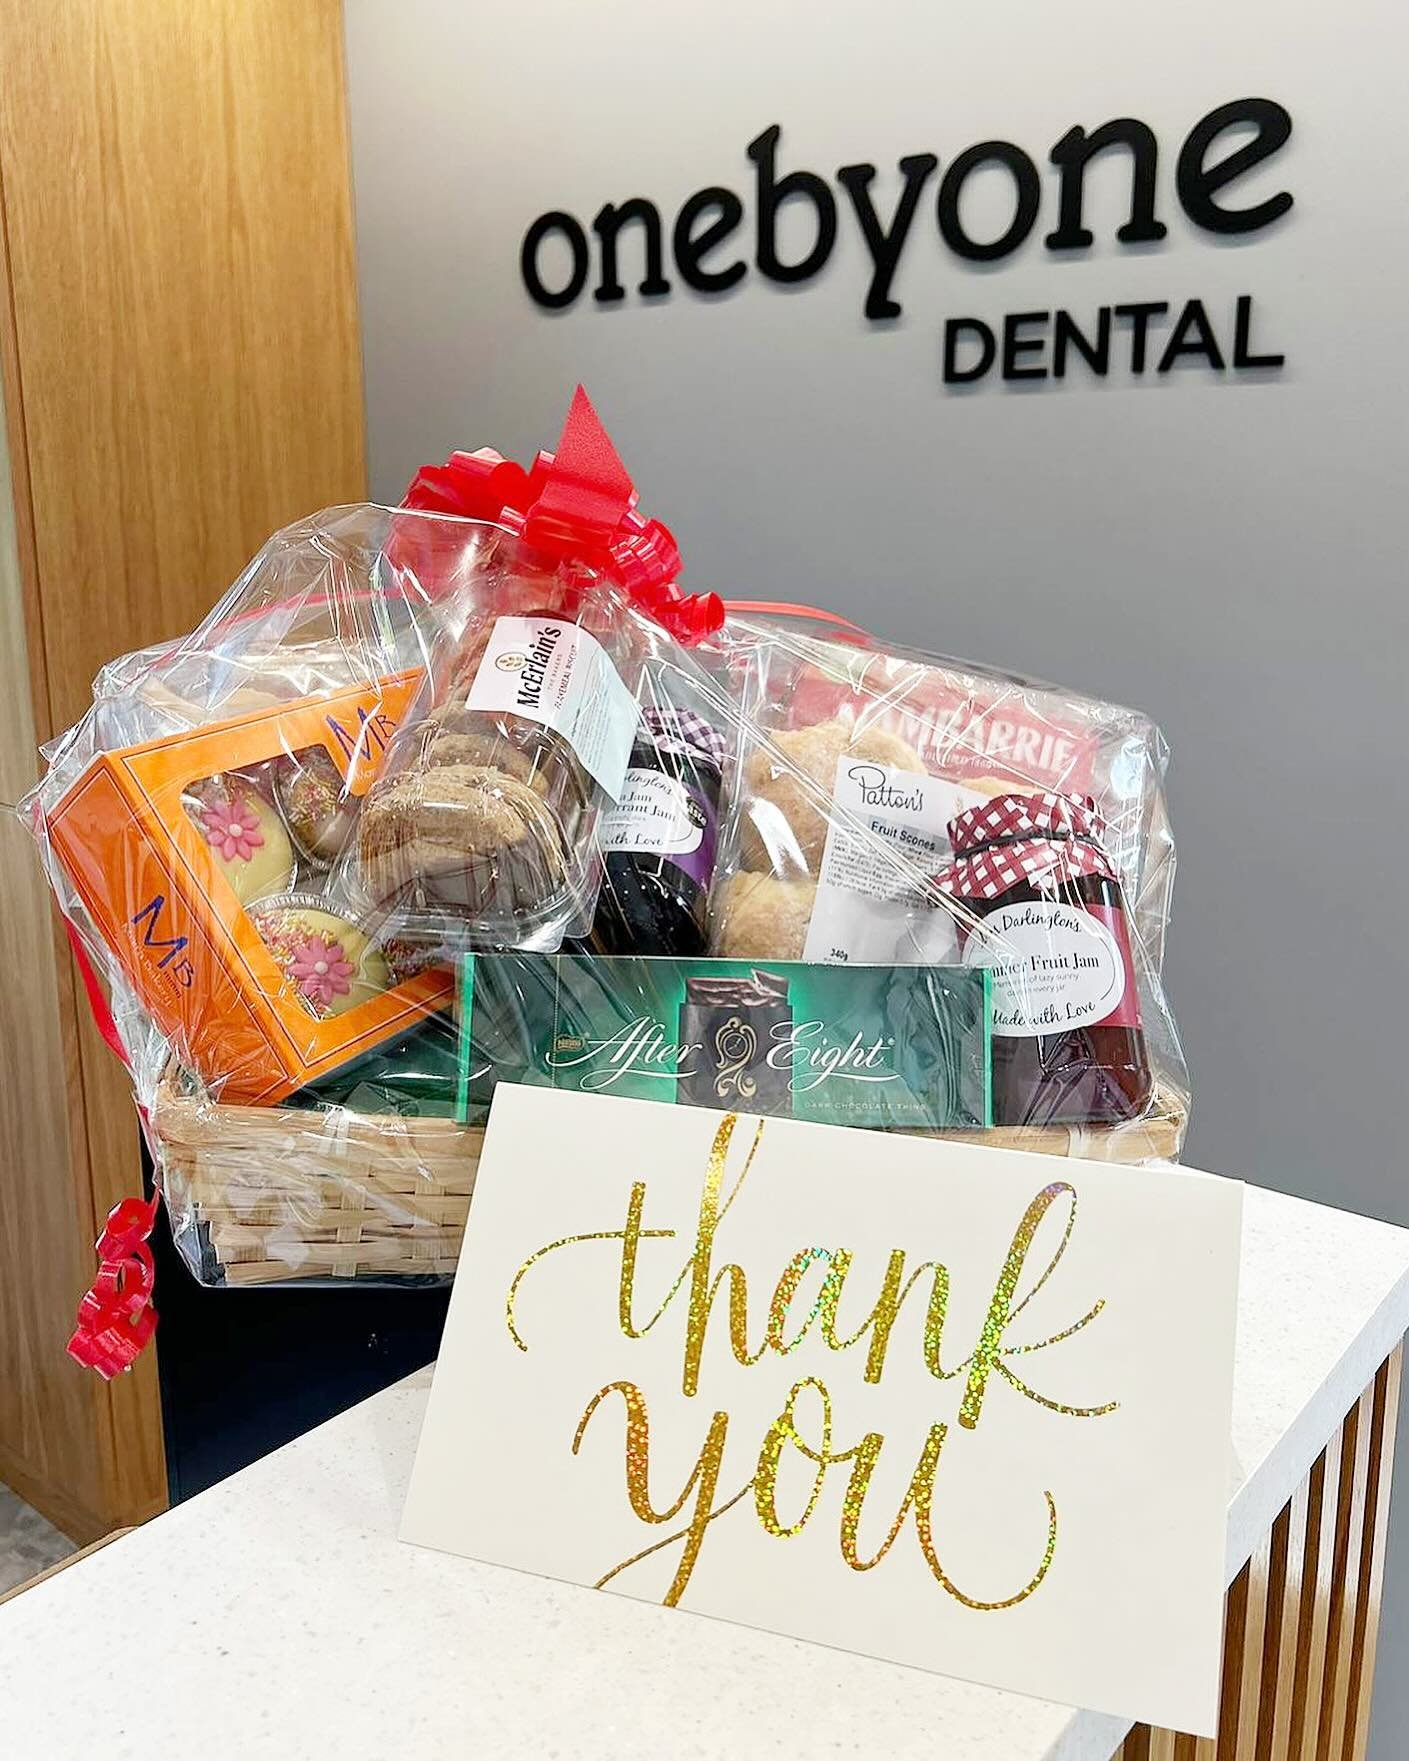 No no no&hellip; Thank You 🙏🤗
What a Friday - Sunshine ☀️ and #gifts 🎁🙌
A beautiful #hamper for @michaelcrilly_dental 👨🏻&zwj;⚕️ and our wonderful nursing team 👩🏻&zwj;⚕️ @onebyonedental ♾️ Stranmillis 📍 
Transforming #smiles 😃 with @invisali